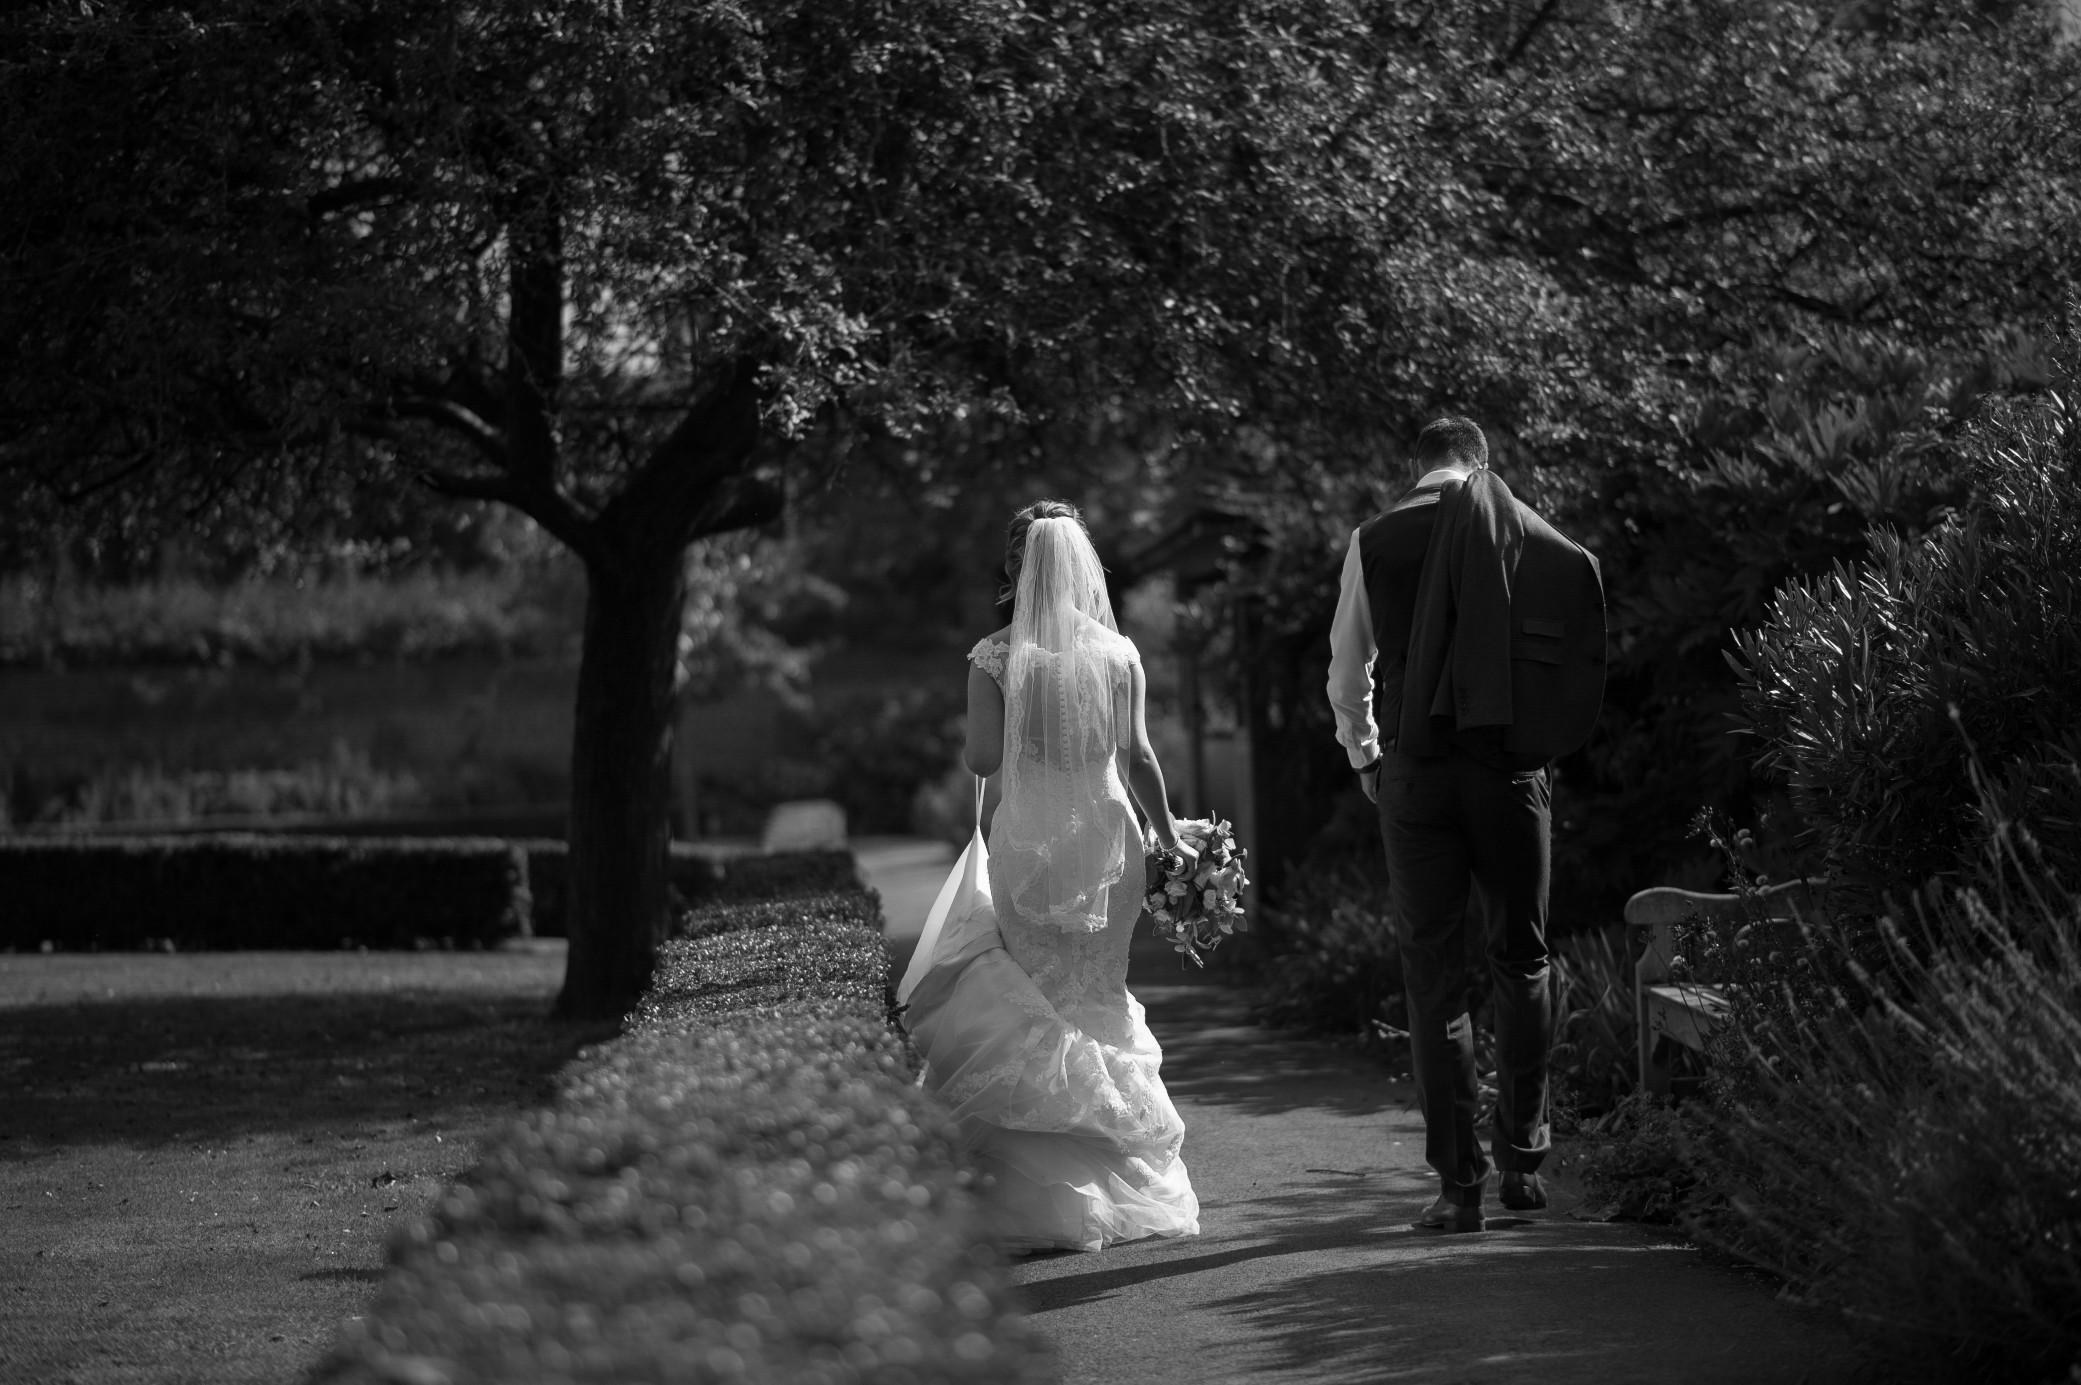 Wedding photography at Tudor Barn in Eltham - the bride and groom